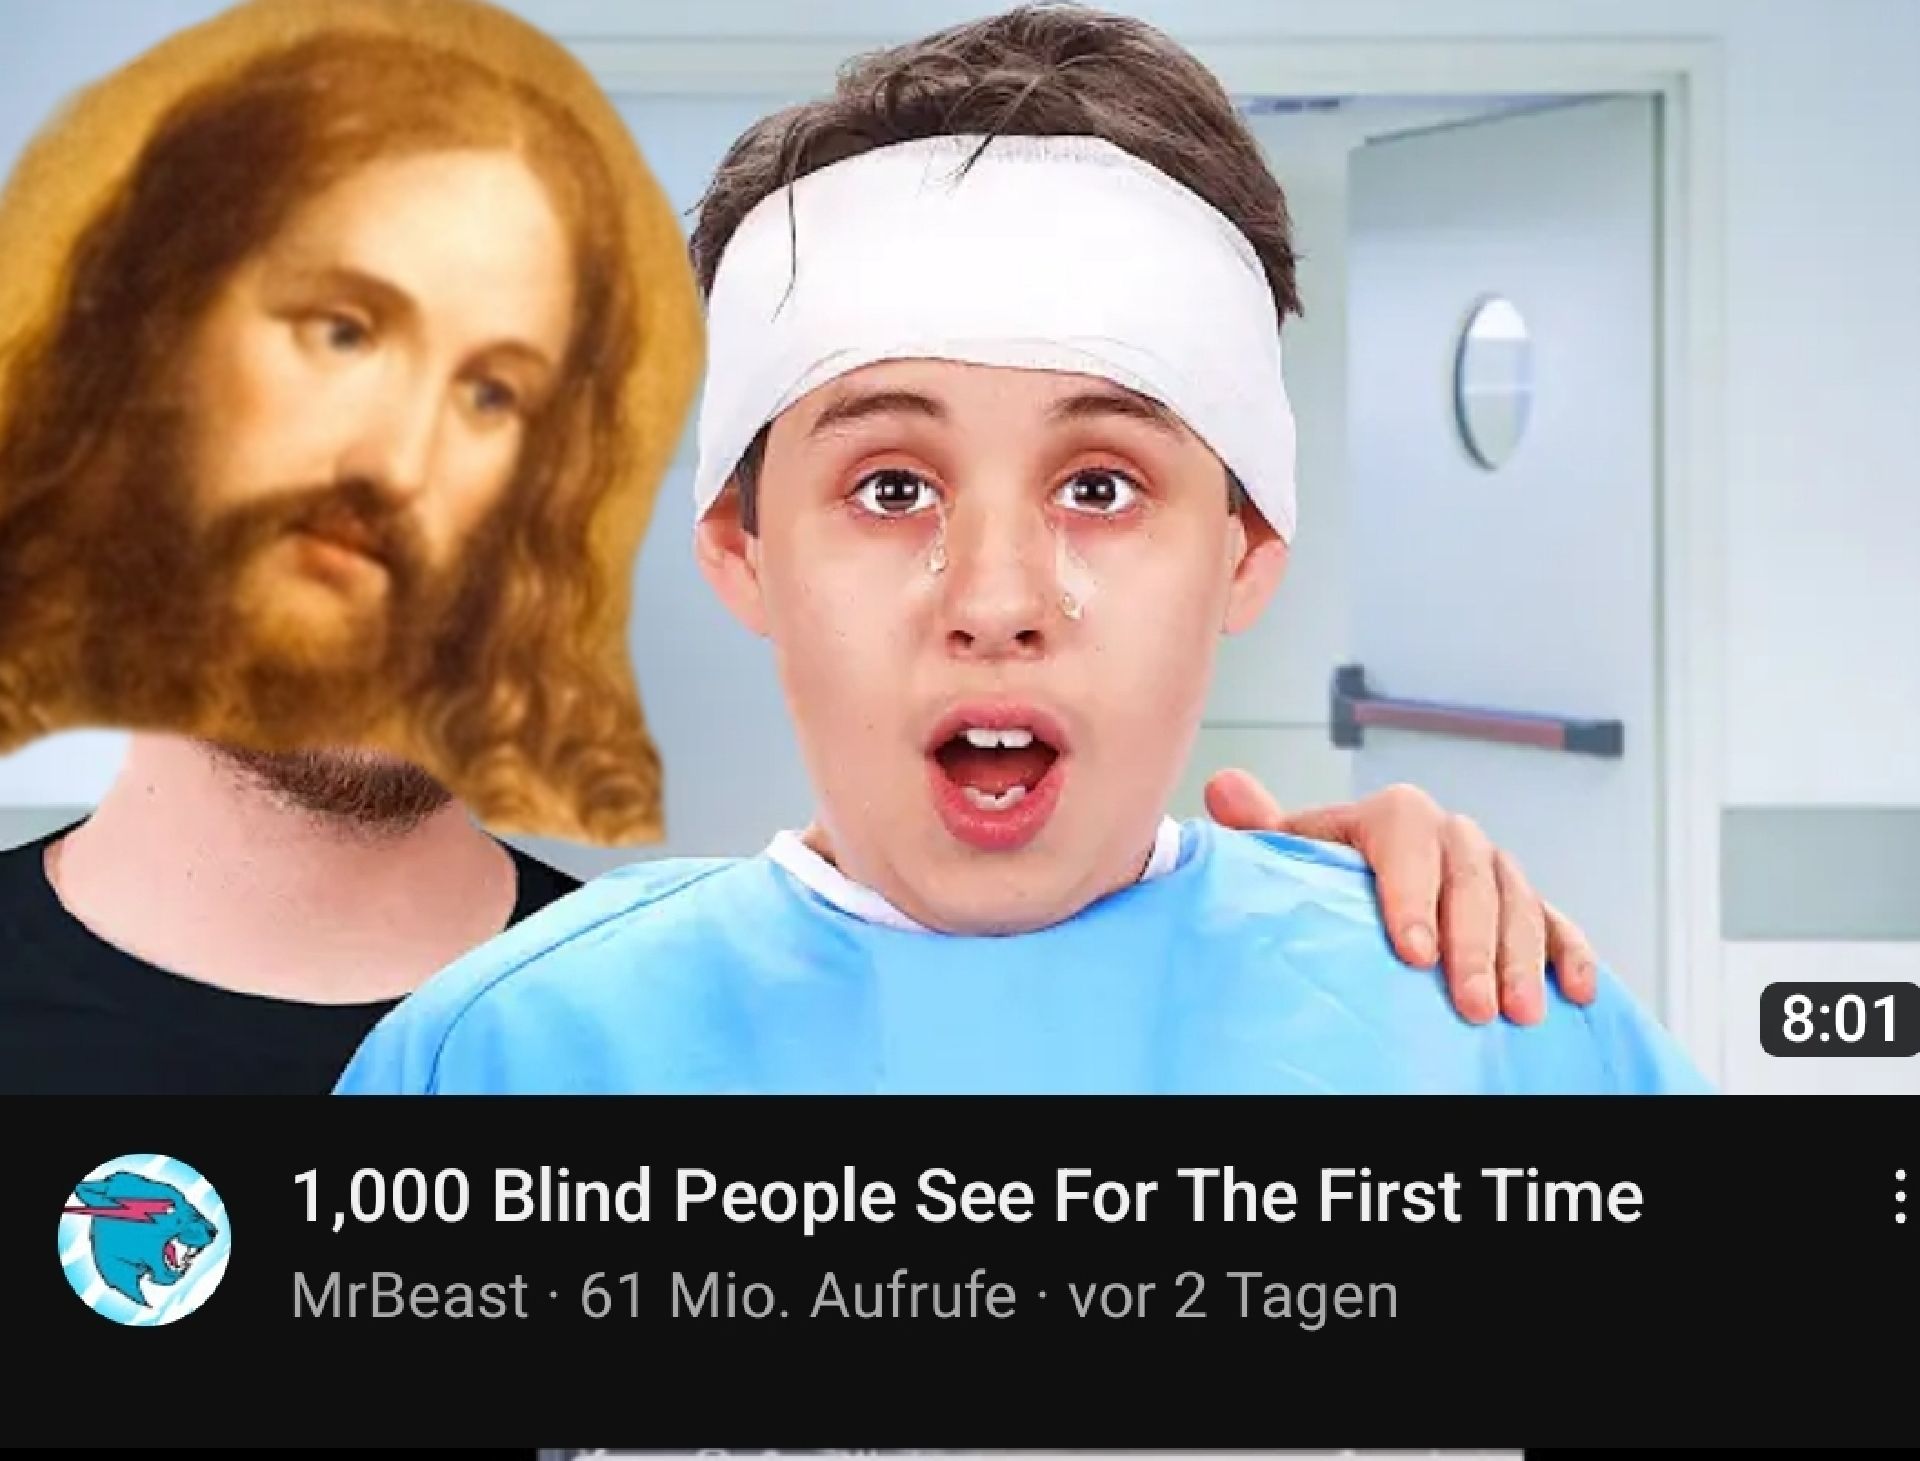 1,000 Blind People See For The First Time
MrBeast 61 Mio. Aufrufe vor 2 Tagen
●
•
8:01